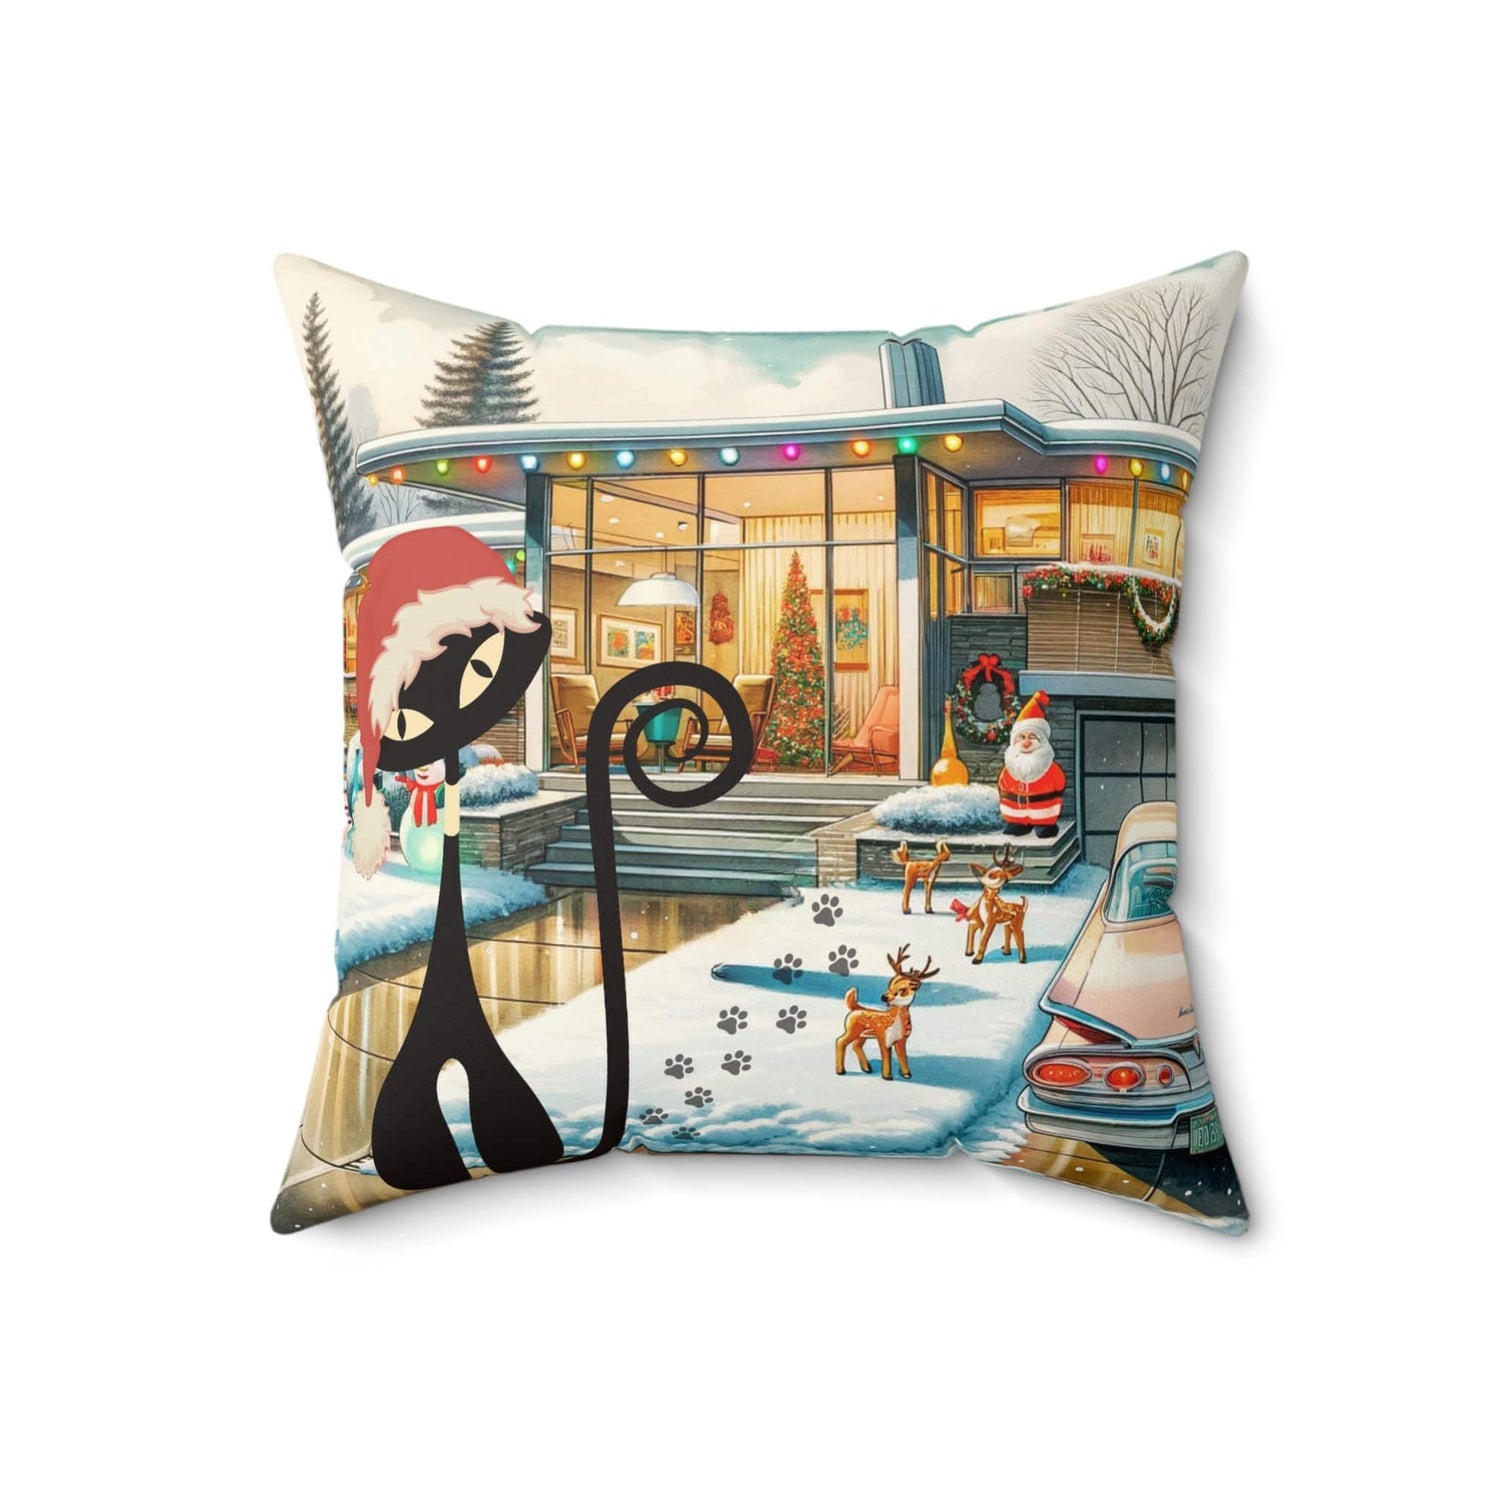 Mid Century Modern Christmas Pillow Gift, Wishing You A Blast Of Joy This Holiday Season, Atomic Cat, Kitschy Style Pillow And Insert Home Decor 18&quot; × 18&quot;